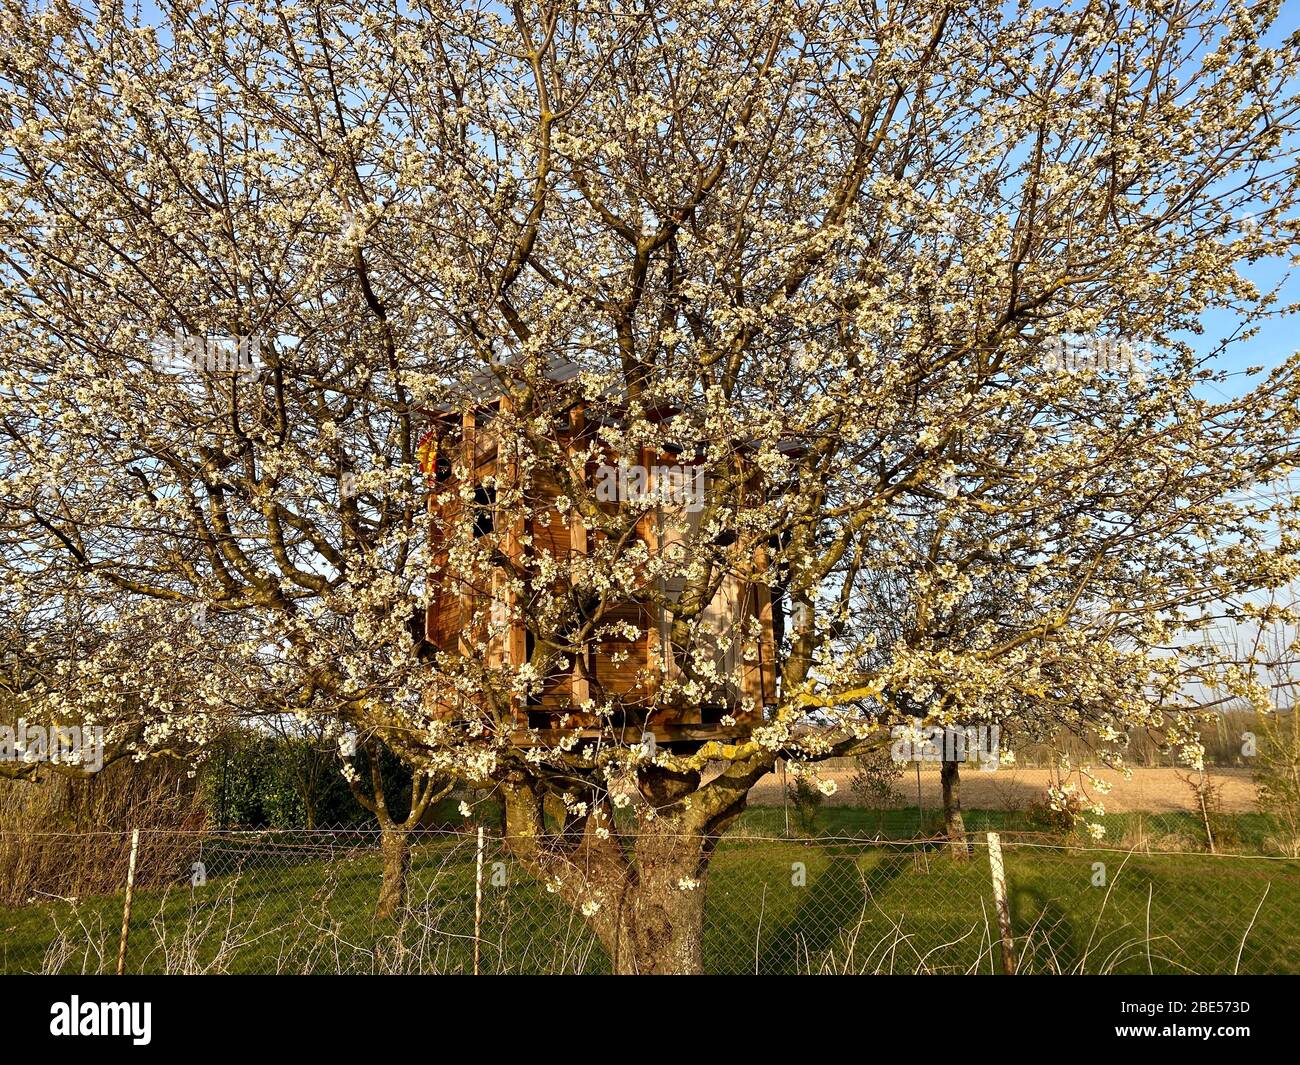 treehouse cabin log built in a blossoming oval shape tree Stock Photo